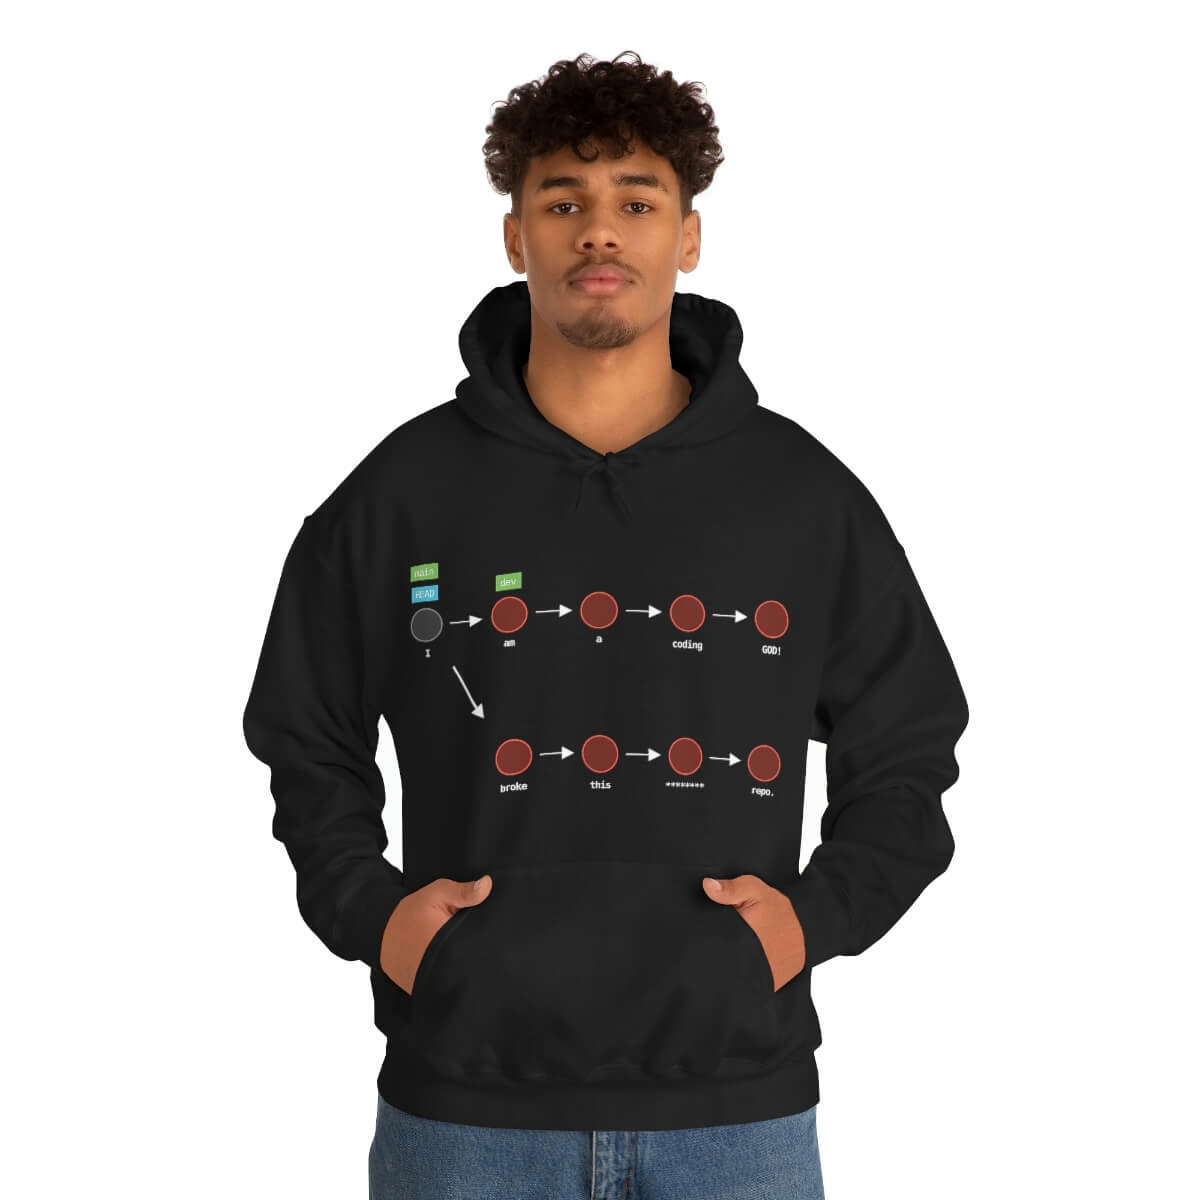 Image of the Coding God Broke the Repo - Unisex Hoodie (Black)